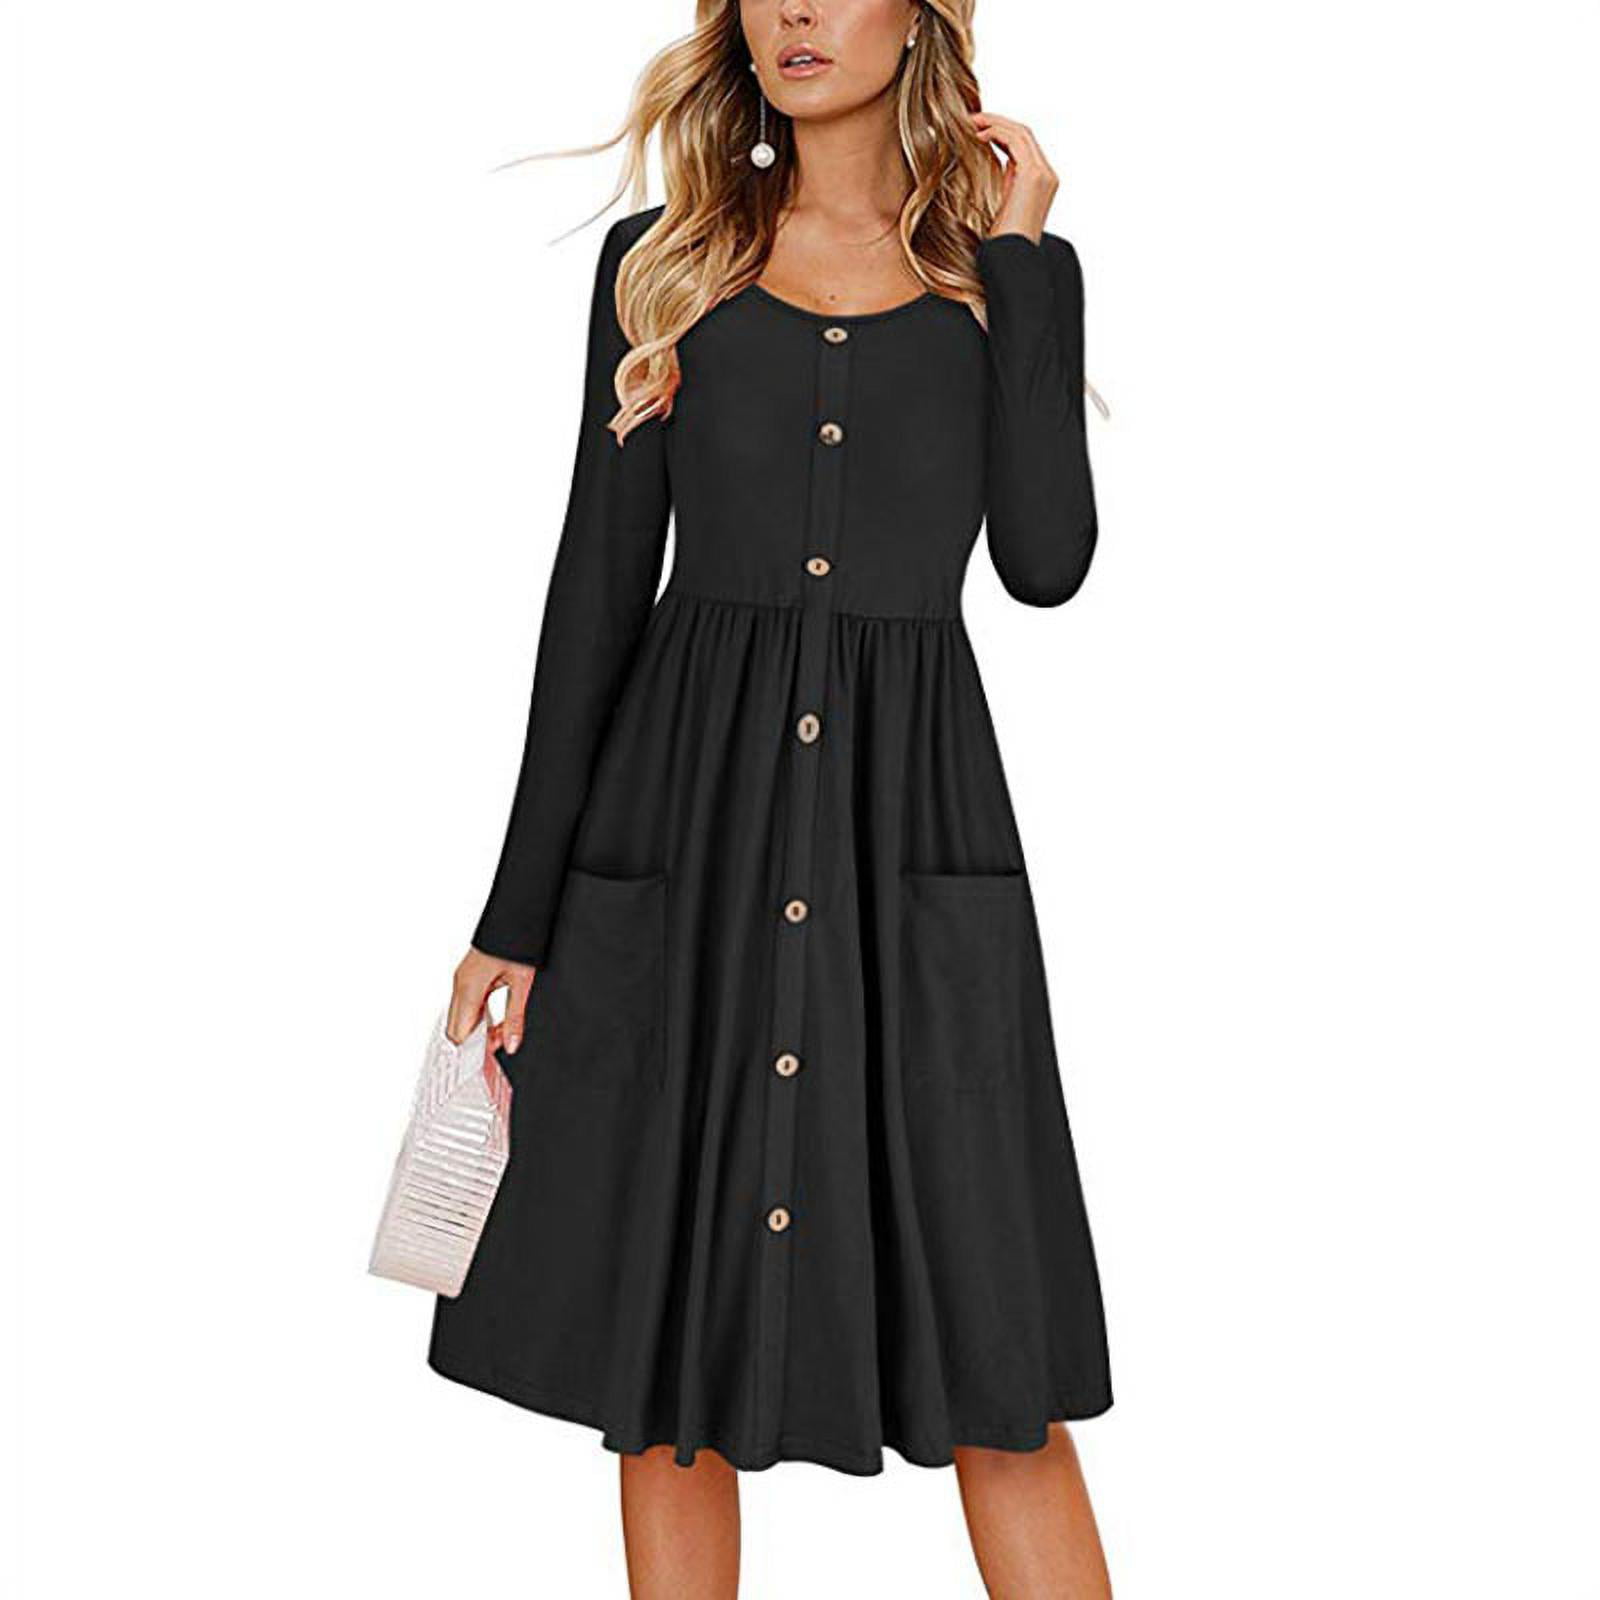 Initial Clearence Womens Casual Long Sleeve Knee Length Belted Dress with Pockets